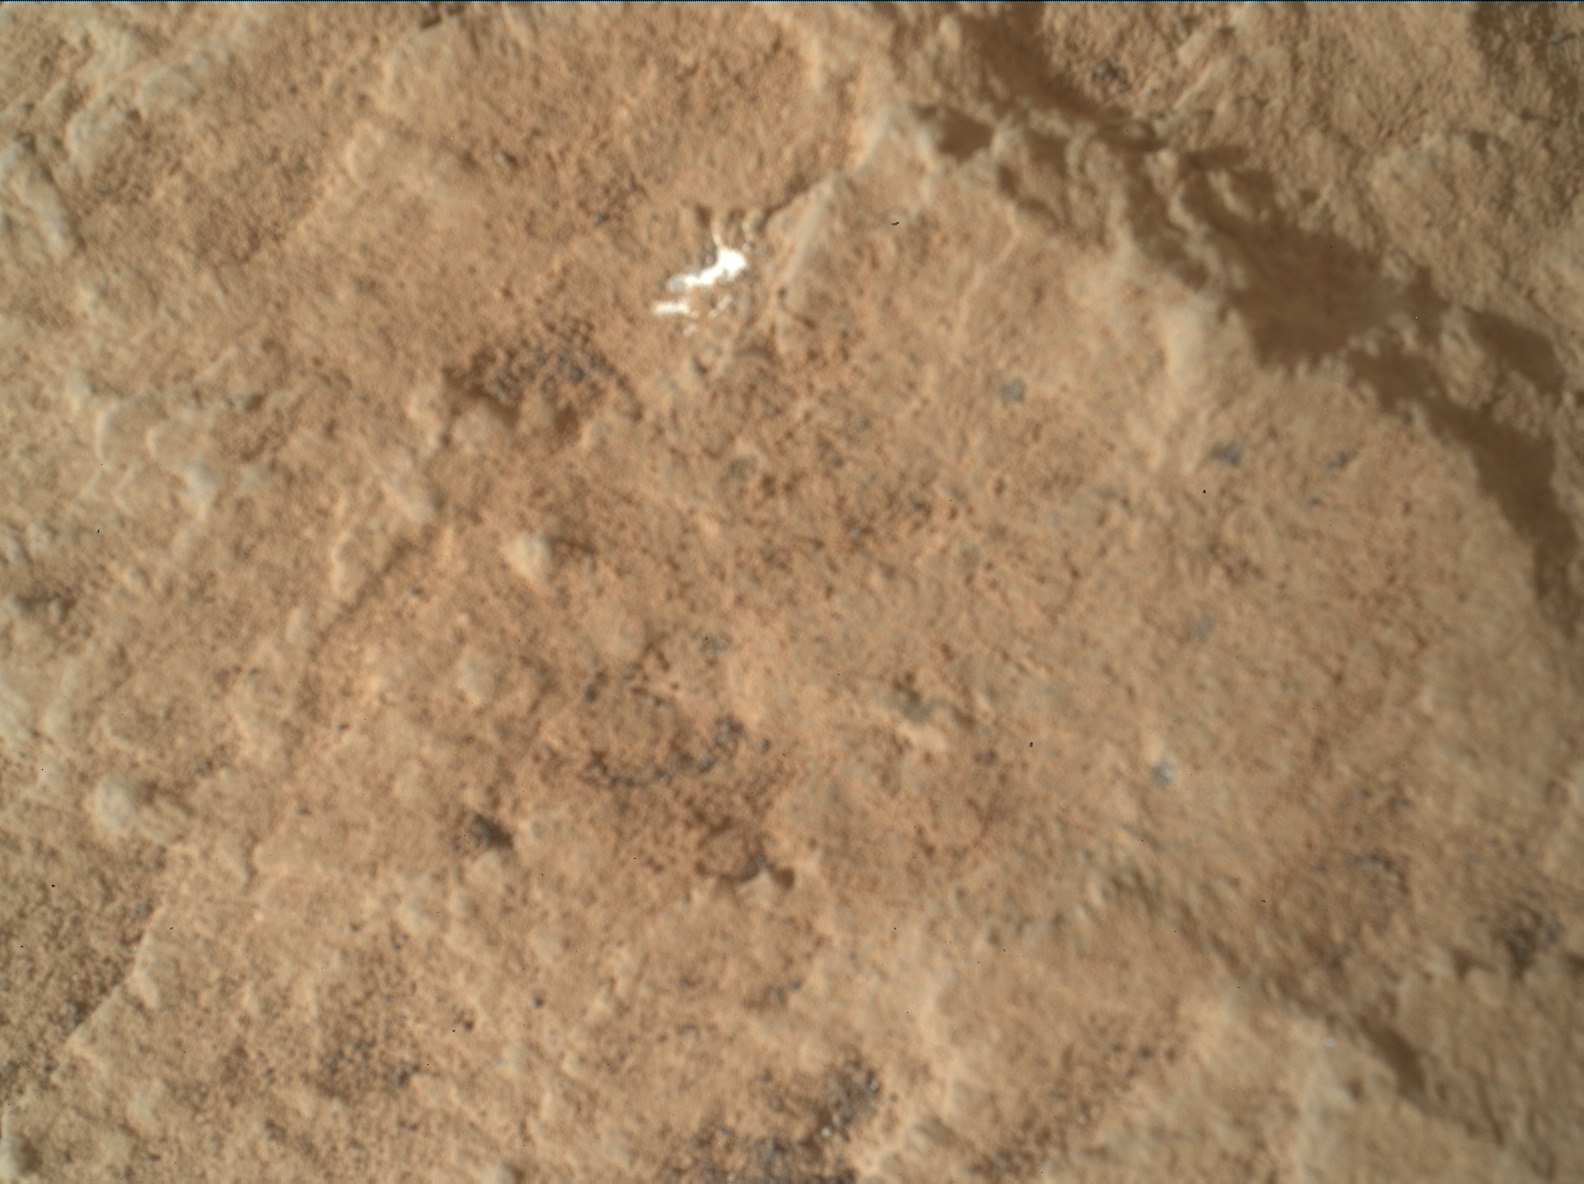 Nasa's Mars rover Curiosity acquired this image using its Mars Hand Lens Imager (MAHLI) on Sol 2441